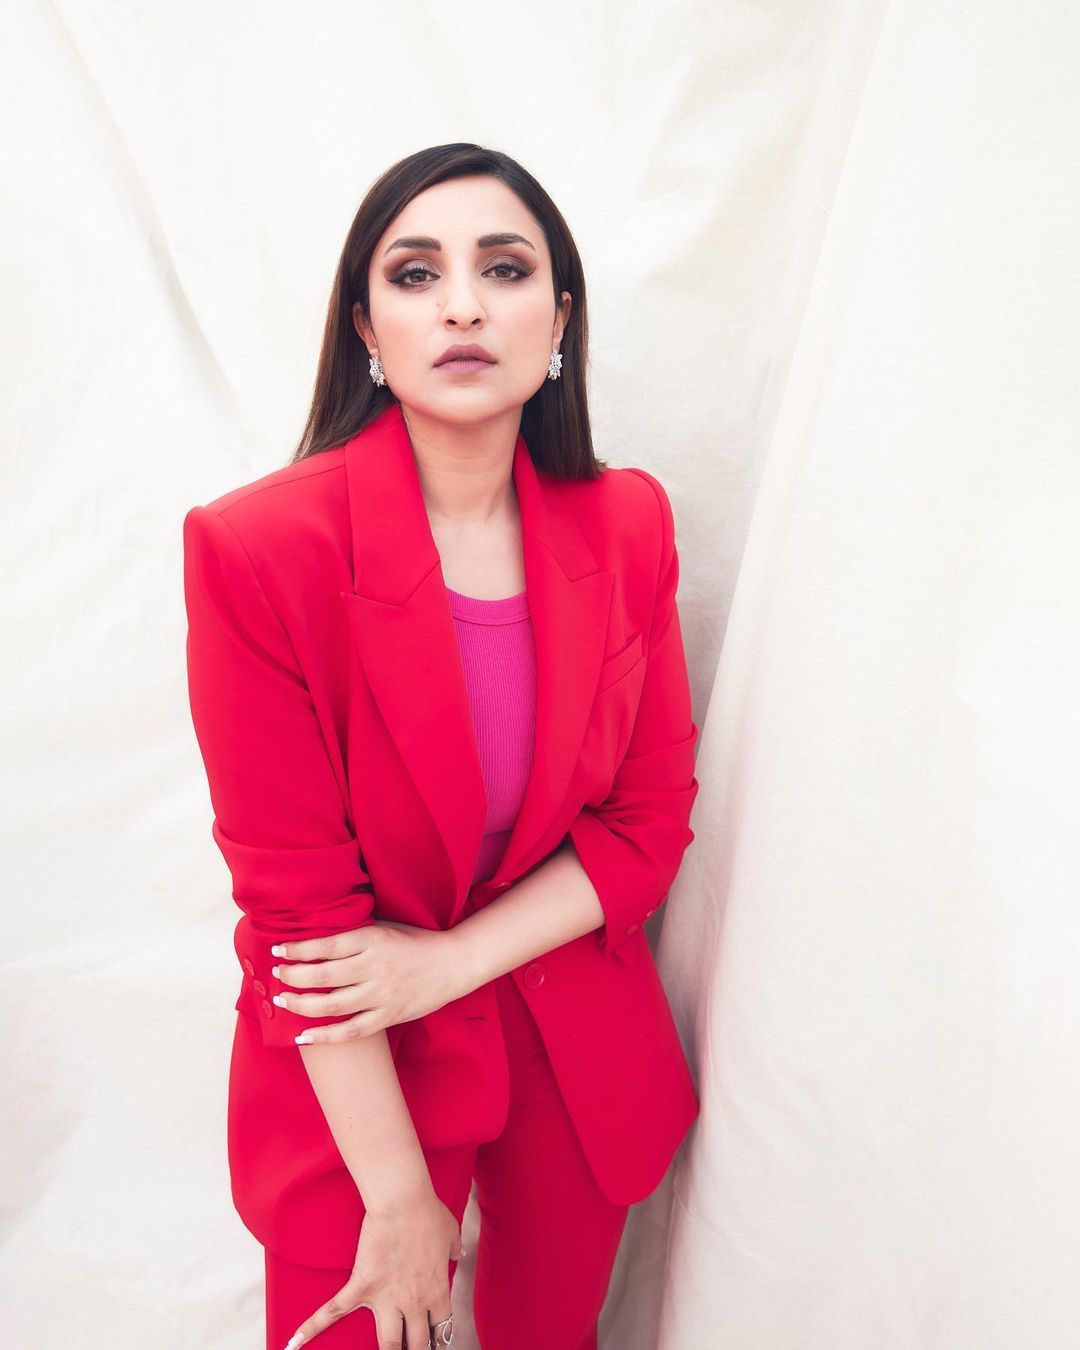 Parineeti Chopra Actress Celebrity Business Suit Office Girl Looking At Viewer White Background Indi 1080x1350